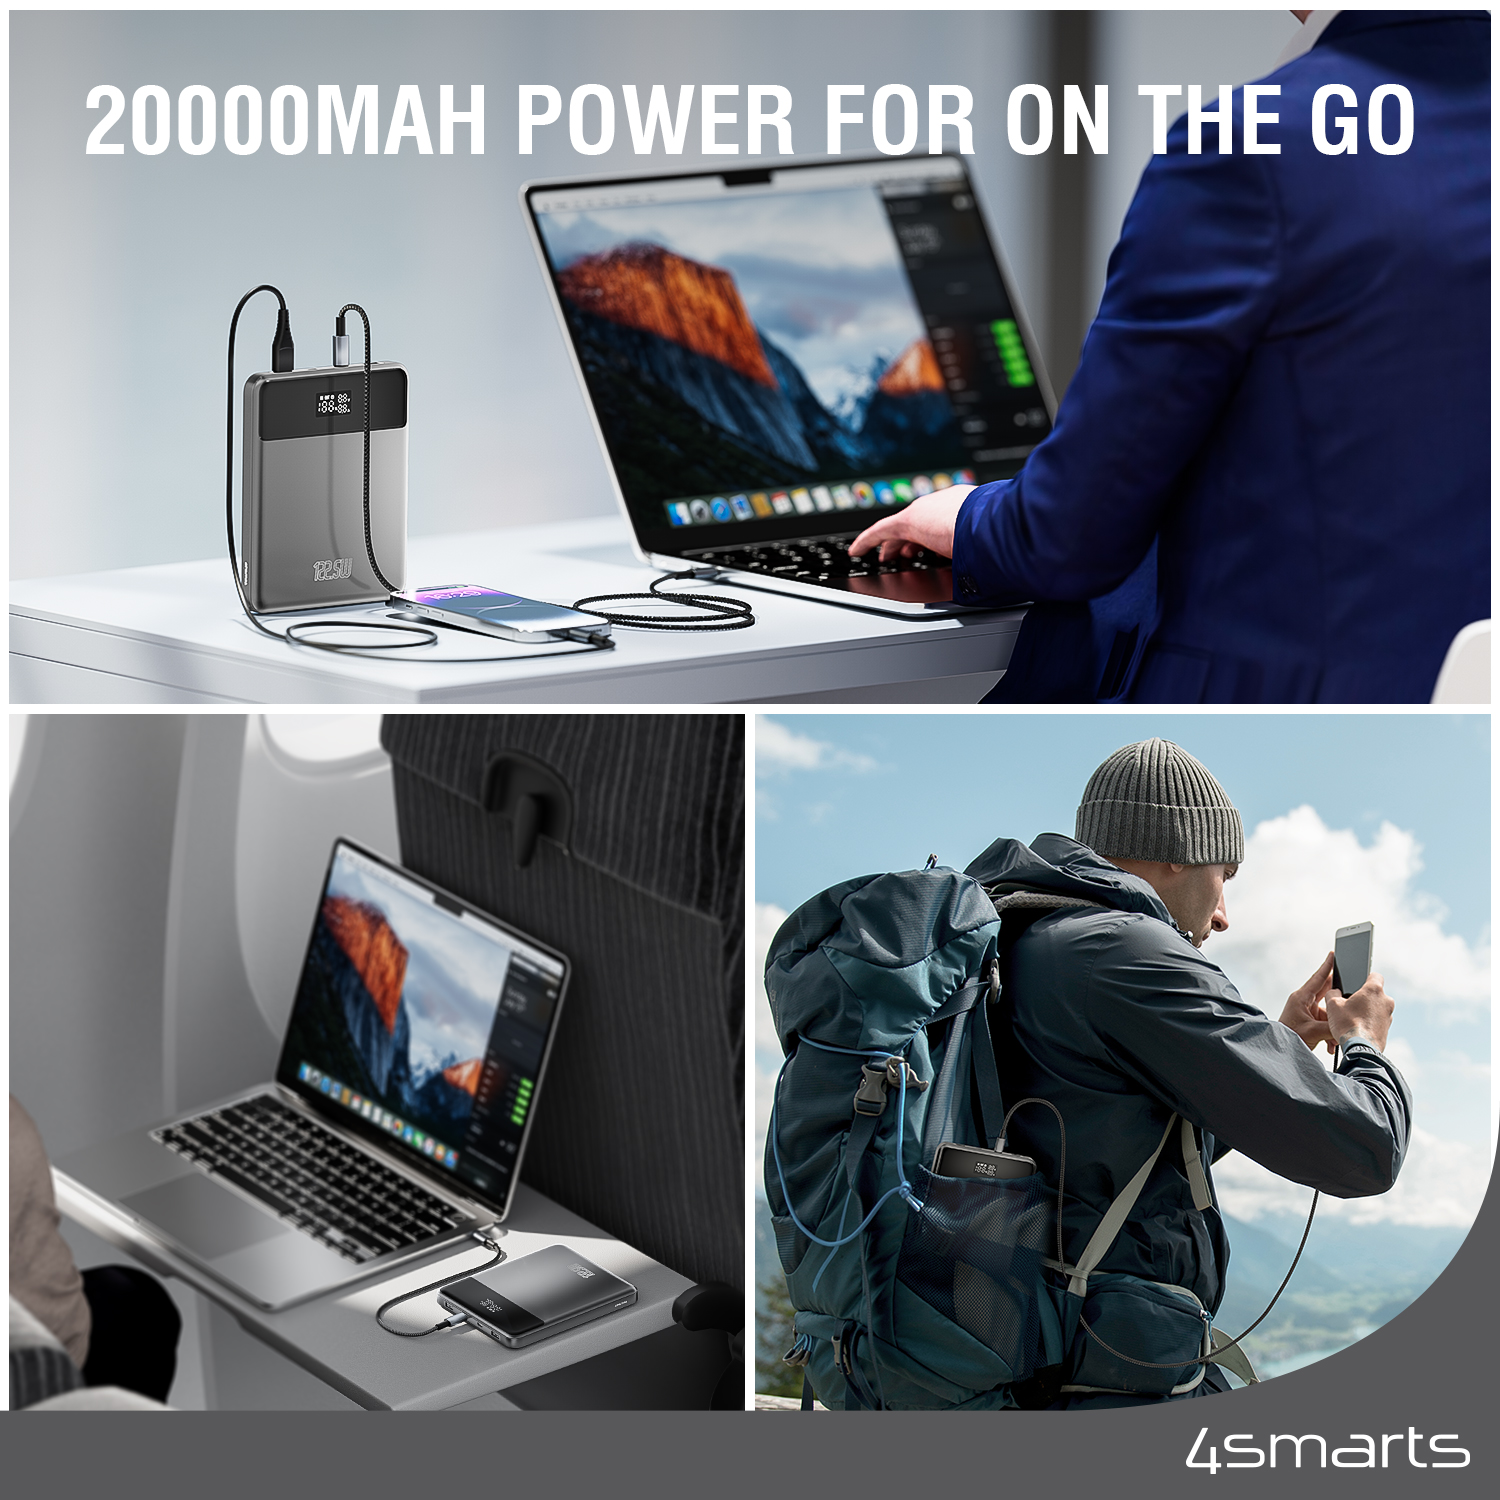 The 4smarts Powerbank Enterprise Slim with a capacity of 20,000 mAh is perfect for on the go.